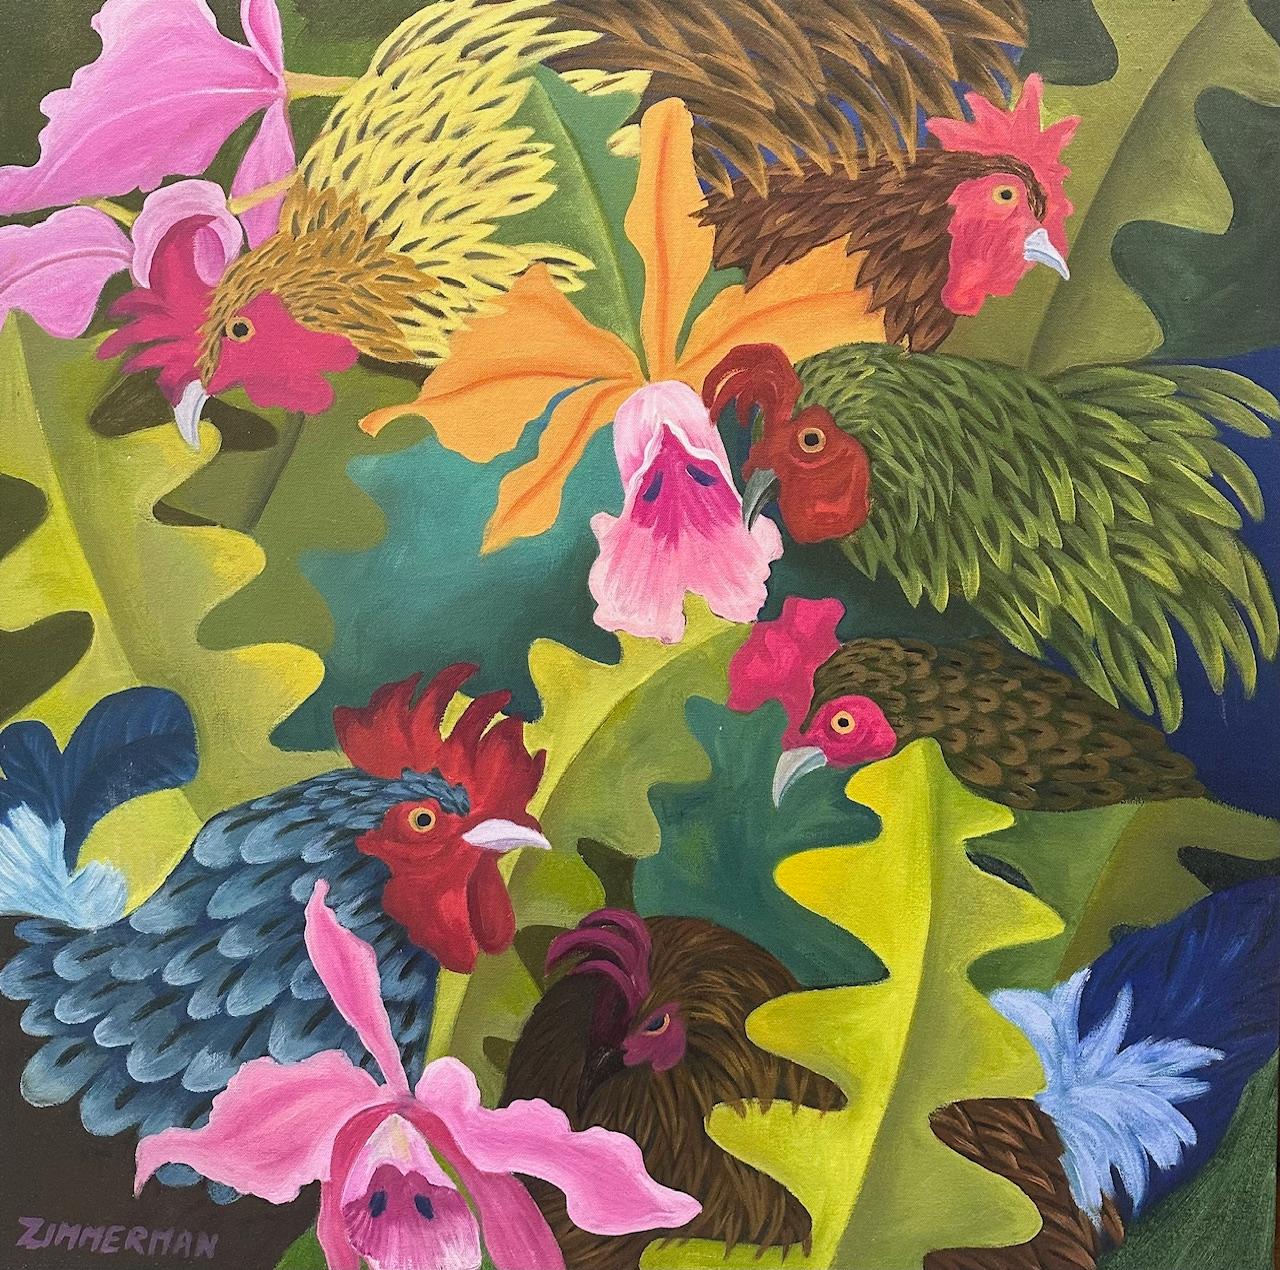 Chickens In The Wild - Limited Edition Print Giclee By Marc Zimmerman

The original painting is in the artist's private collection. The print quality is exceptional.

*Please contact us for different sizes.


Marc Zimmerman creates playful